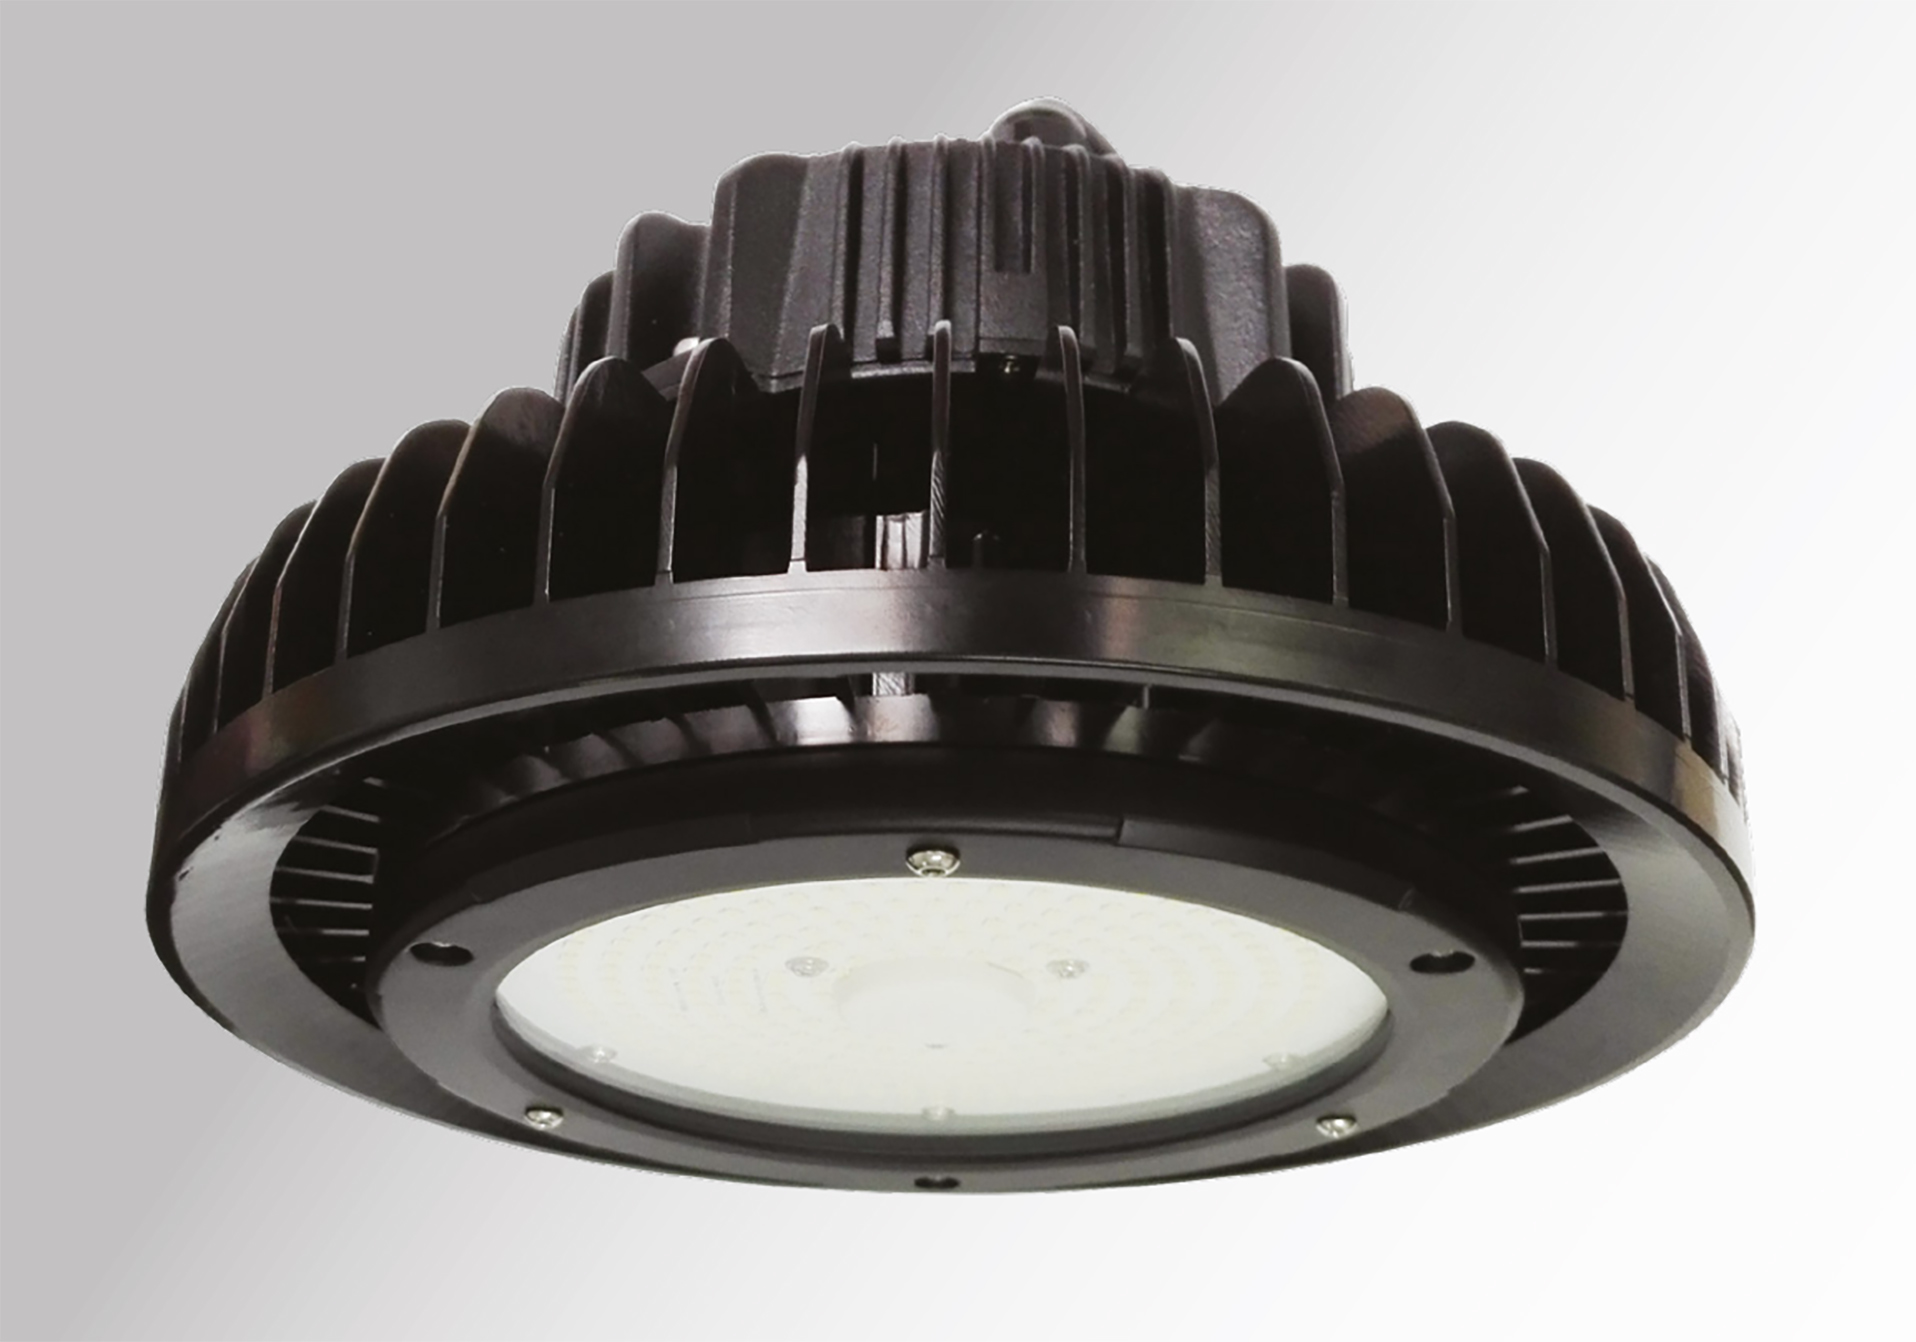 ECS continues its carbon reduction strategy with new workshop LED lighting